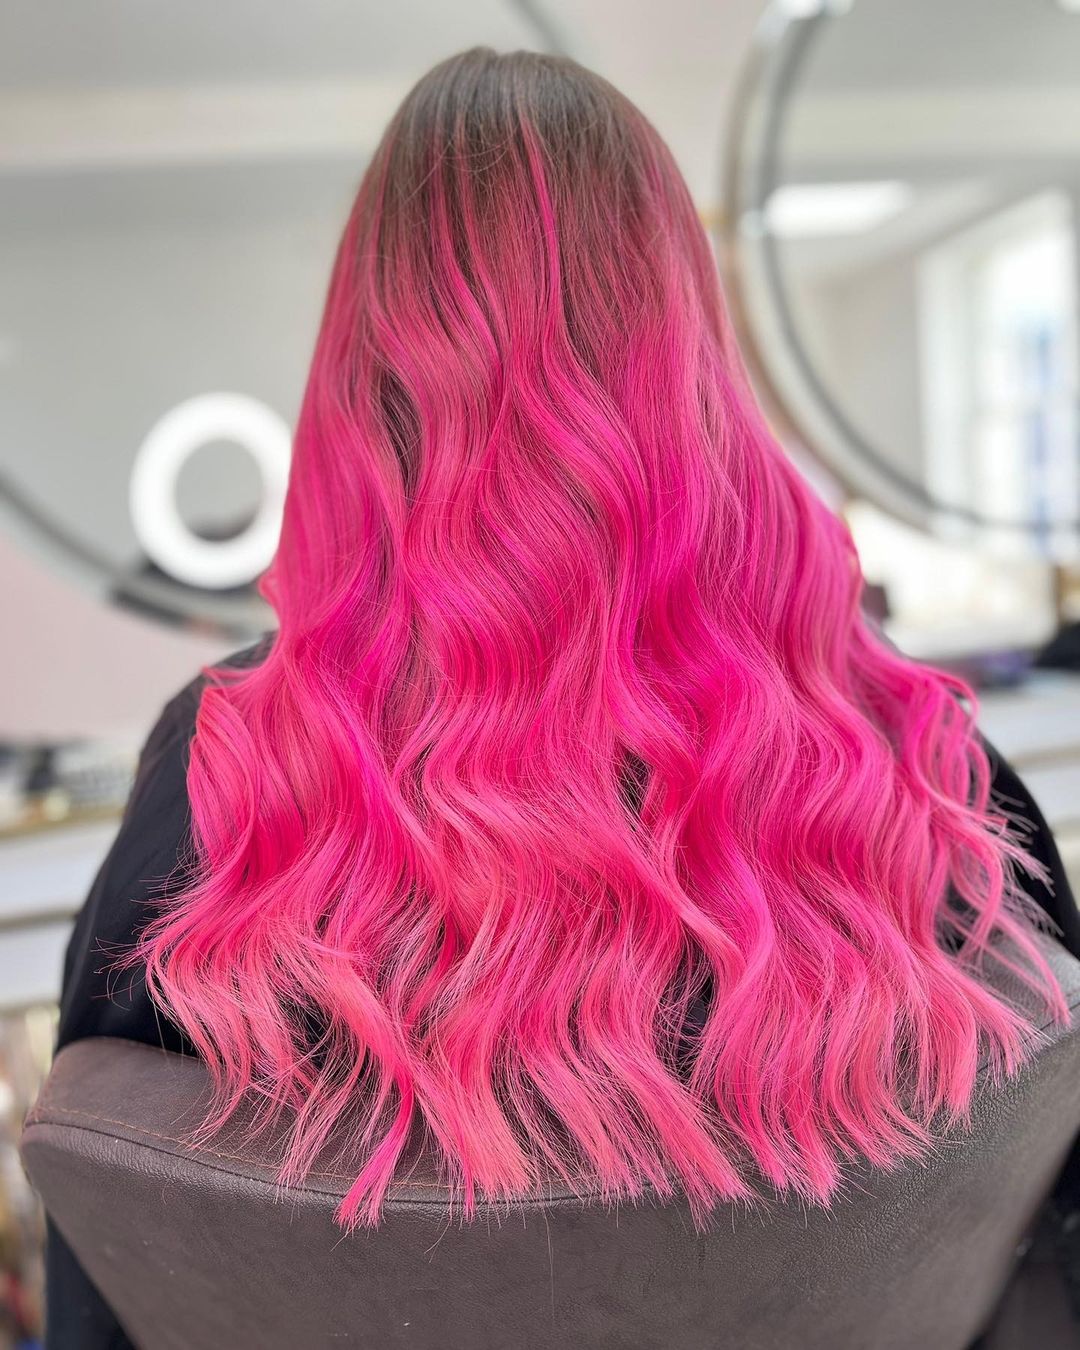 pink ombre hair color 138 Ombre pink hair blonde | Pastel pink ombre hair | Pink balayage Hair Pink Ombre Hair Color for Women